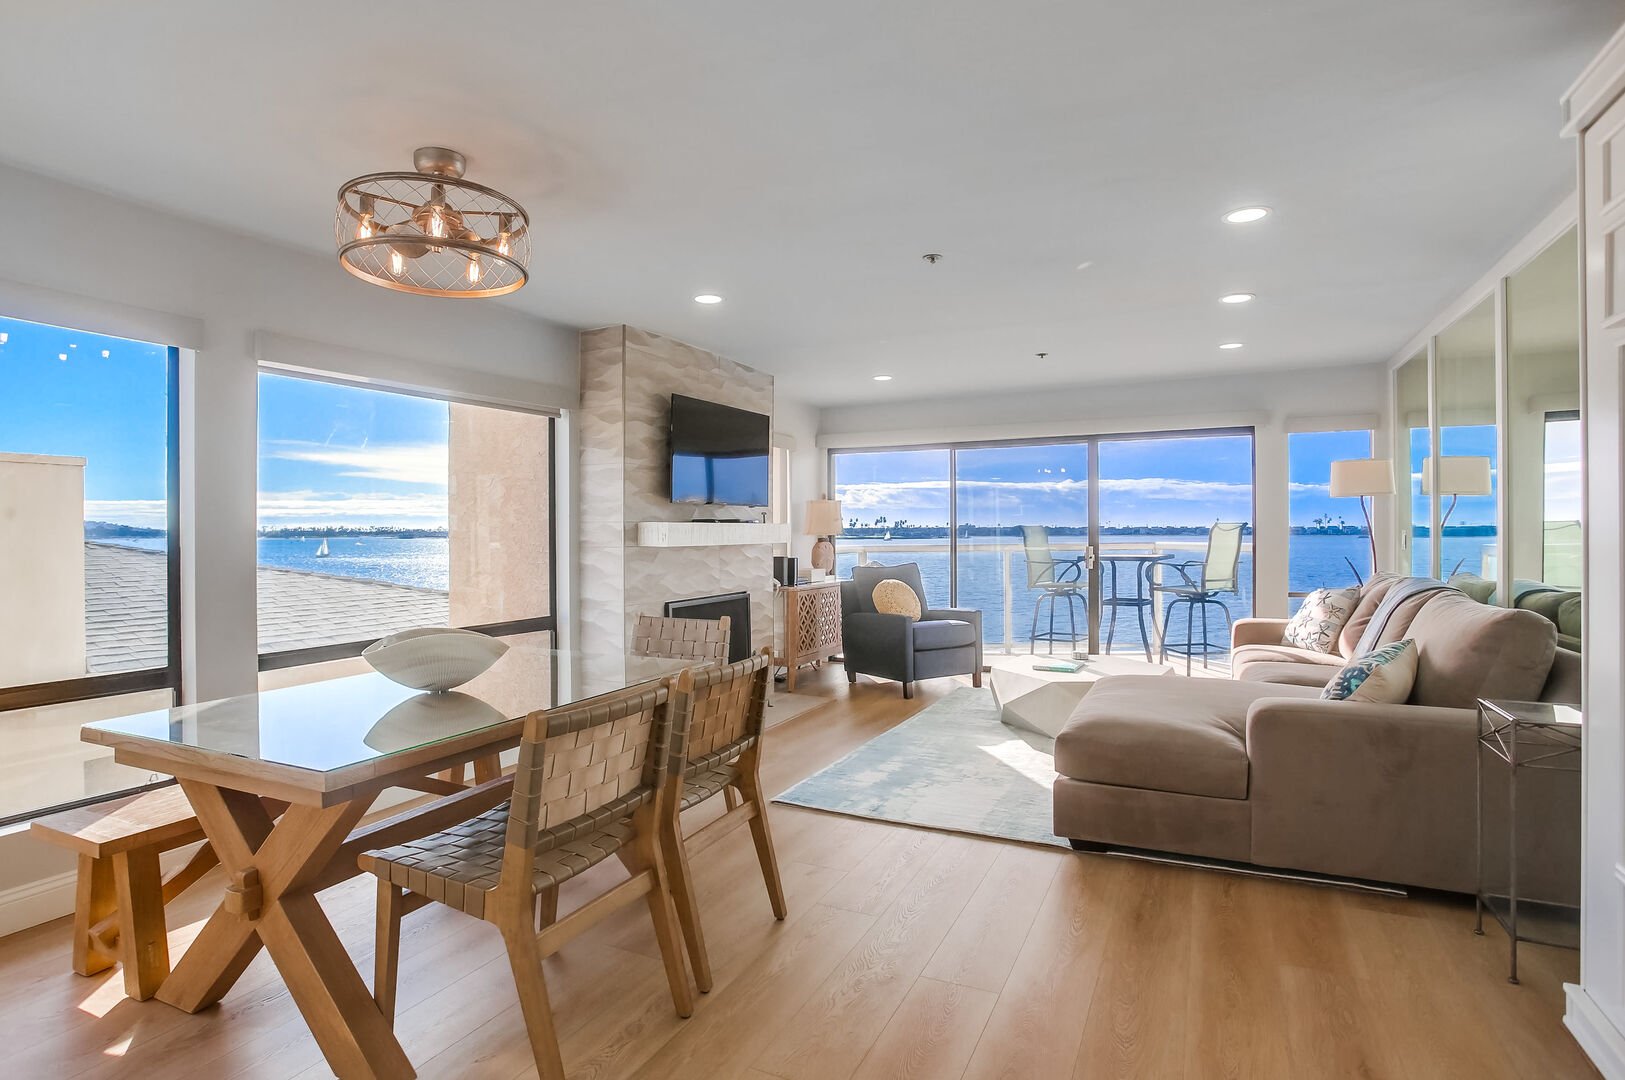 Newly renovated, bright and open living space with expansive views of Mission Bay!